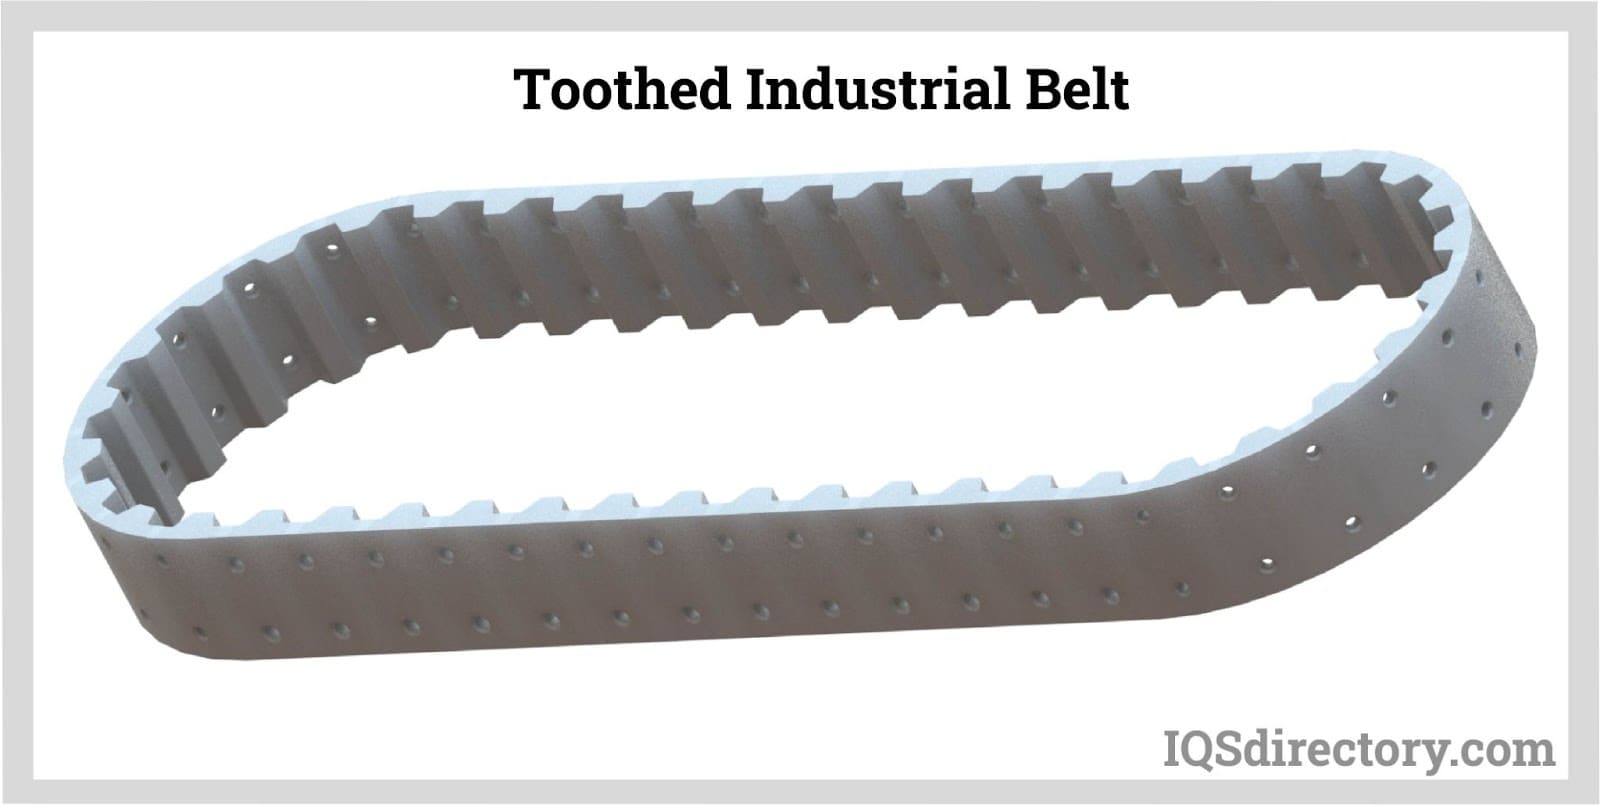 toothed industrial belt